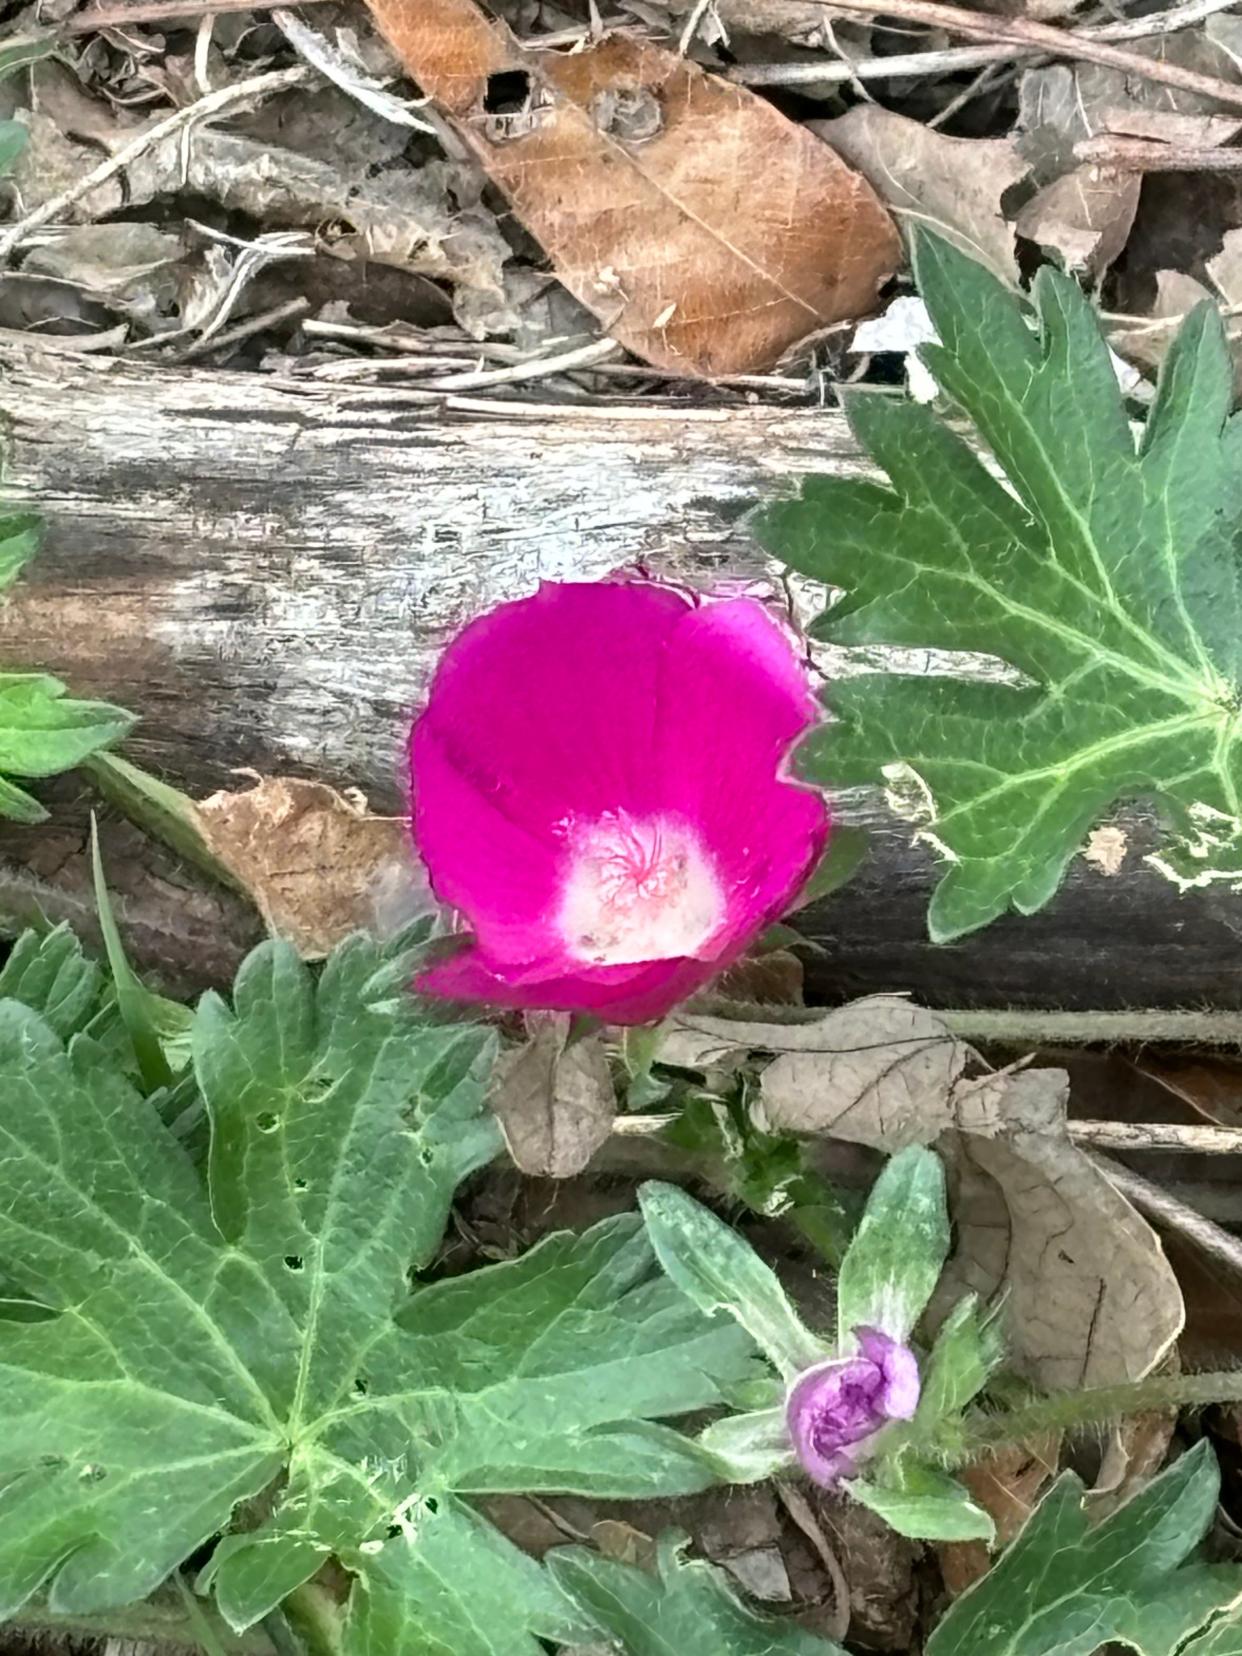 The wine cup wildflower has blossoms that are a brilliant color of scarlet.